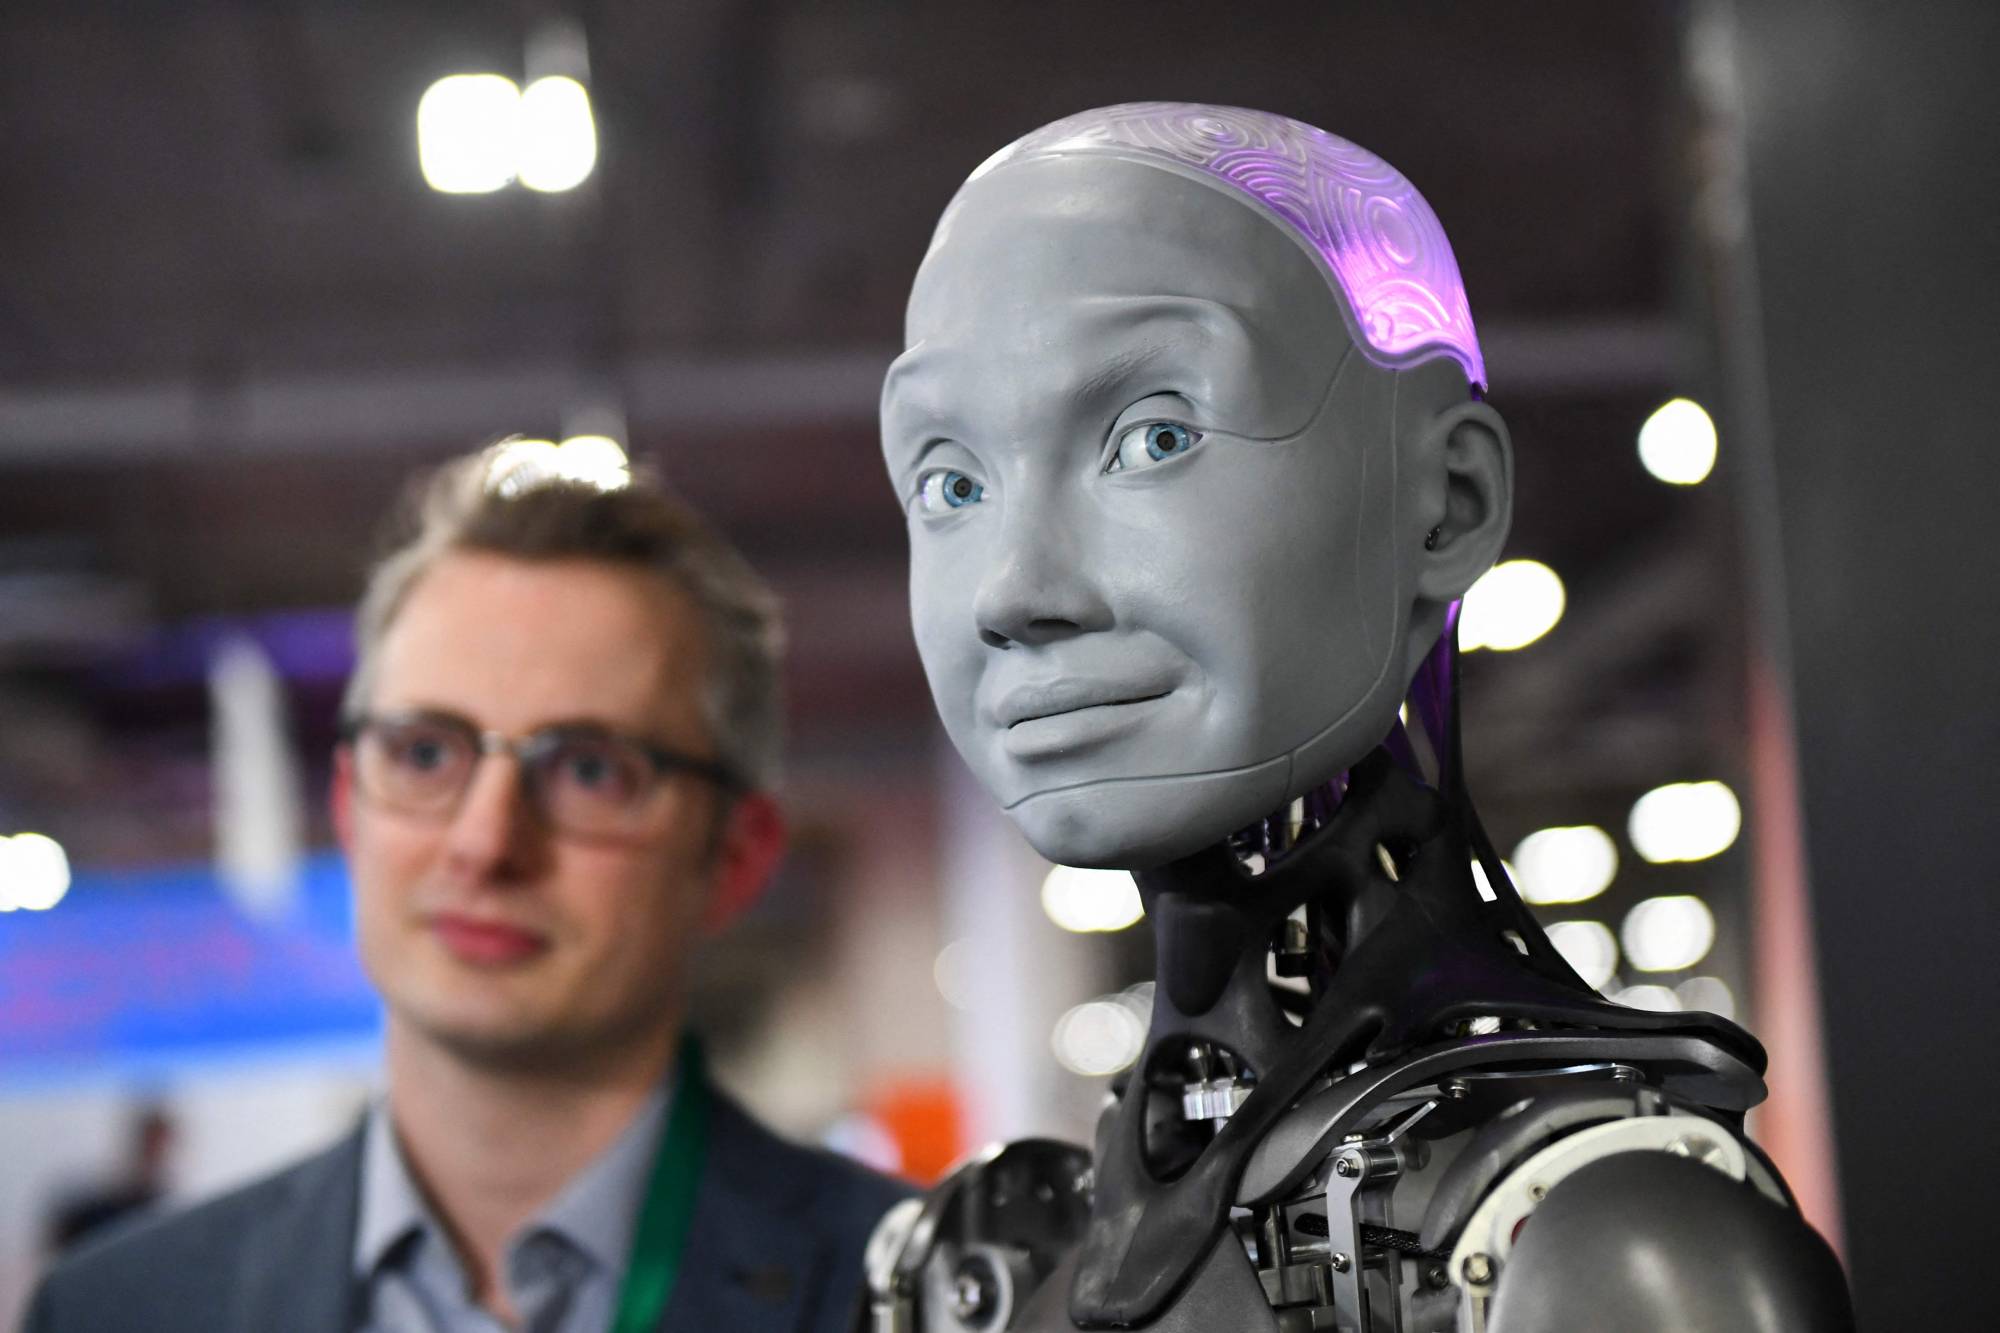 Morgan Roe, director of operations at Engineered Arts, speaks about the Engineered Arts Ameca humanoid robot during the Consumer Electronics Show on Jan. 5 in Las Vegas, Nevada. | AFP-JIJI